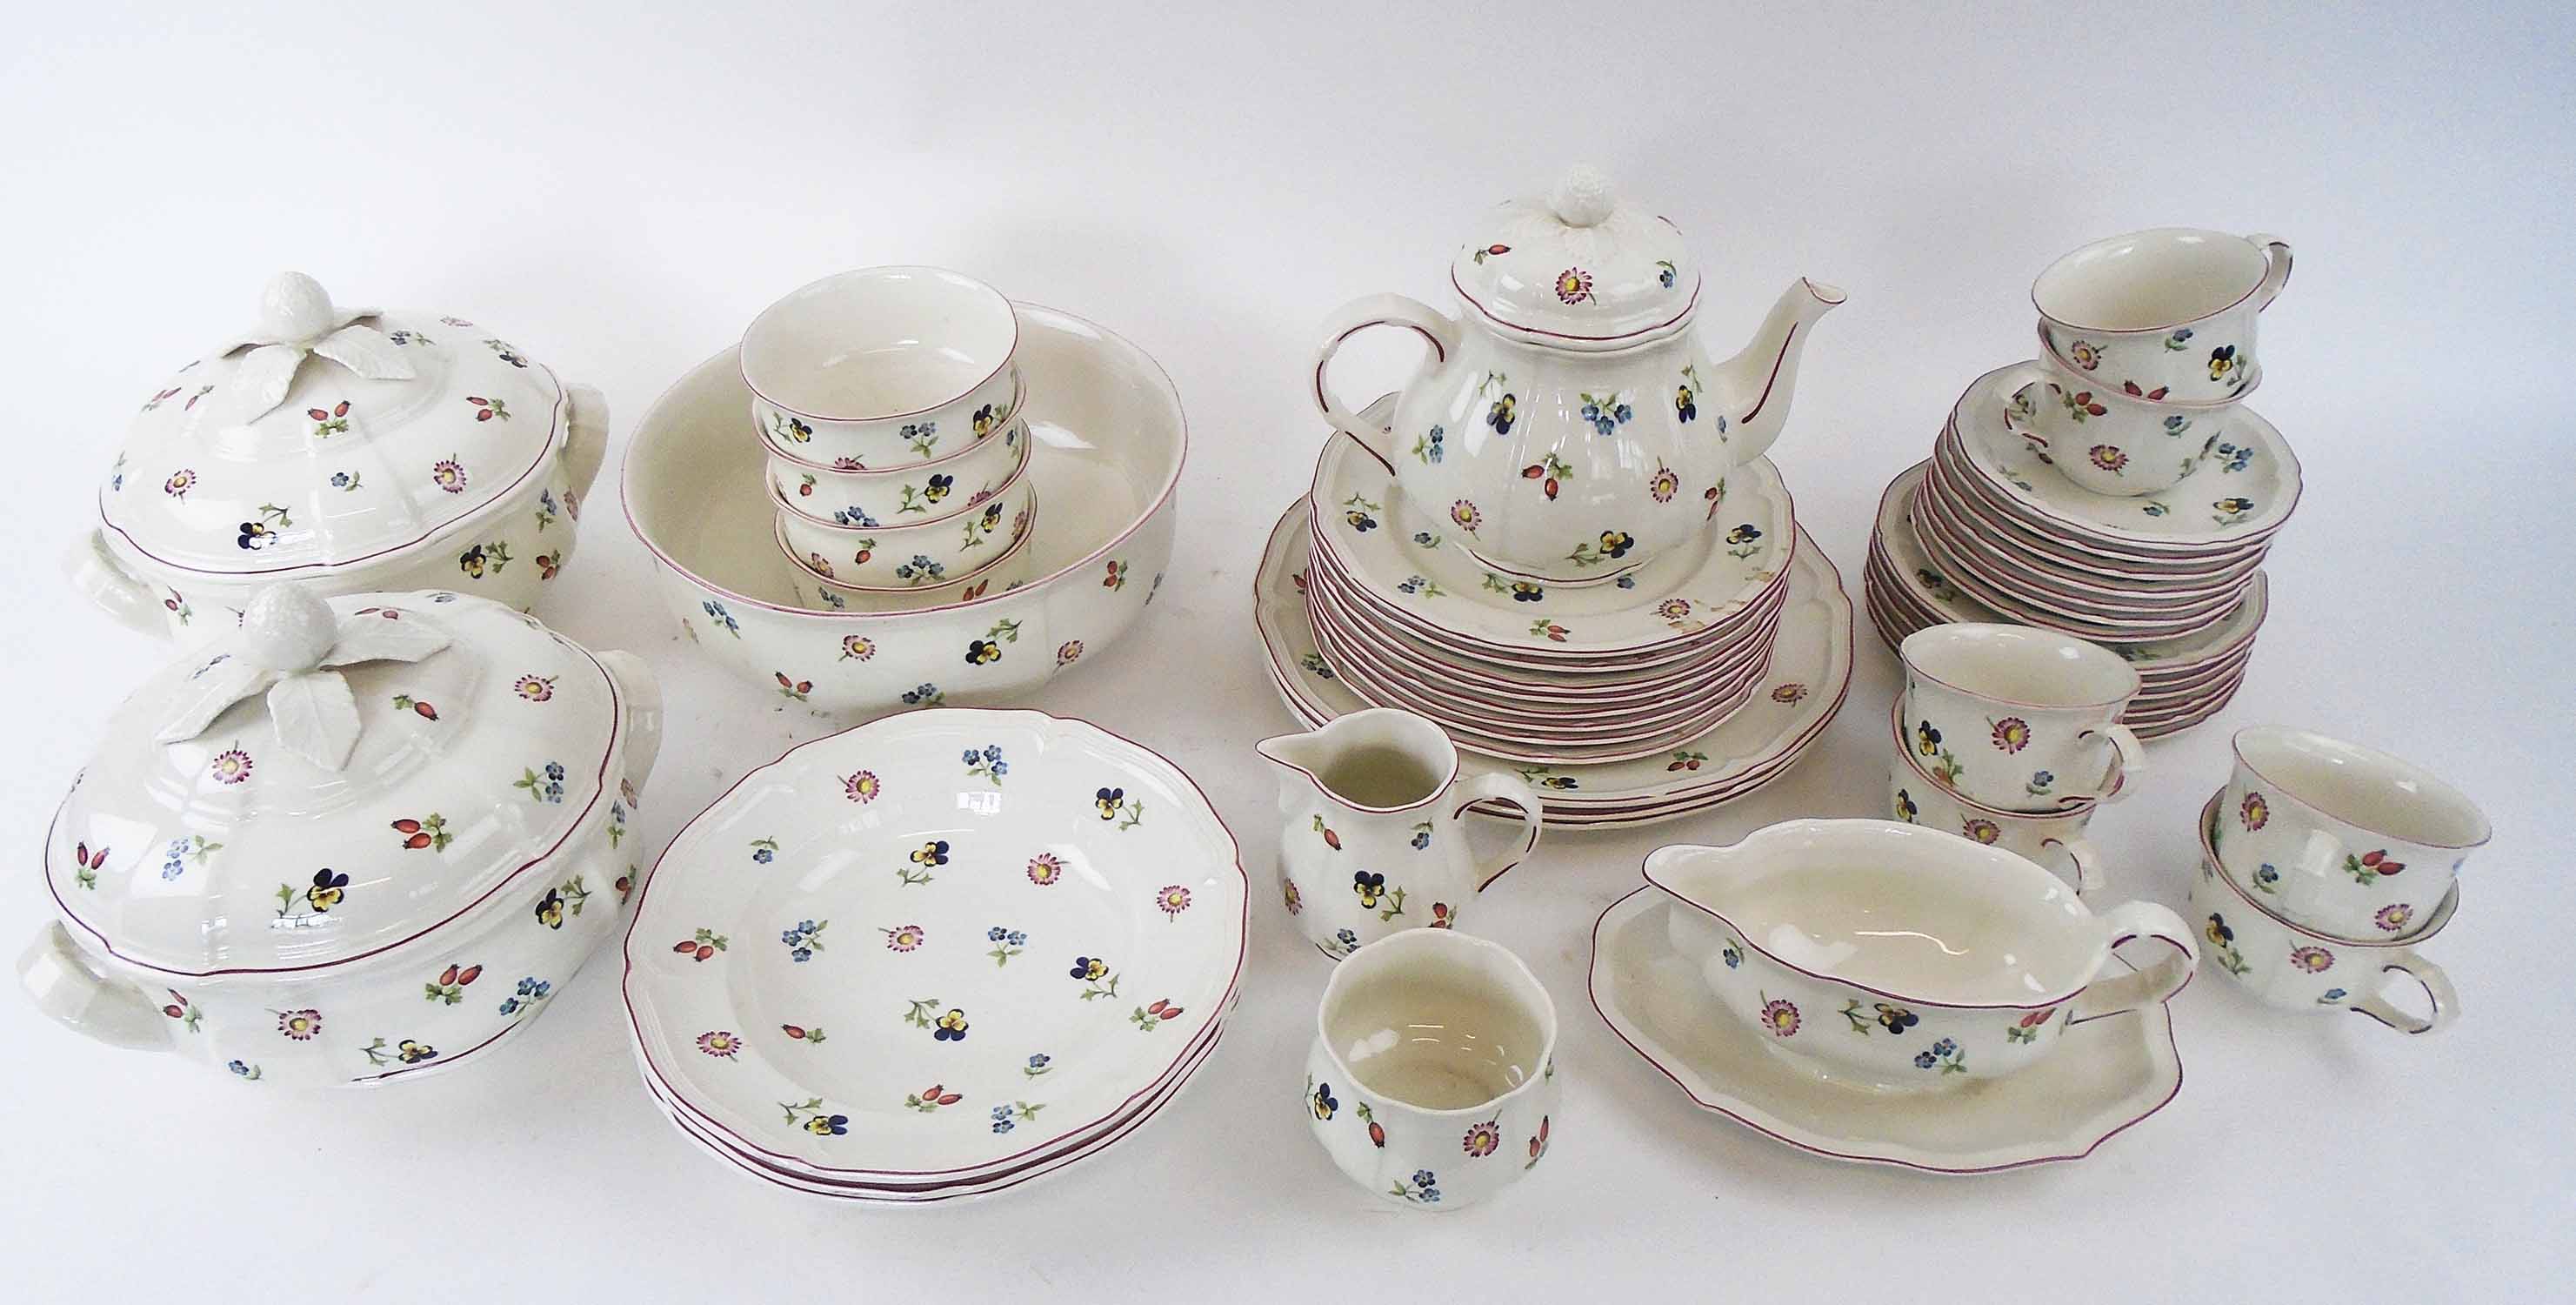 VILLEROY & BOCH 'PETITE FLEUR' PART DINNER SERVICE, includes two tureens  and serving bowl, (44 pieces) (with faults)